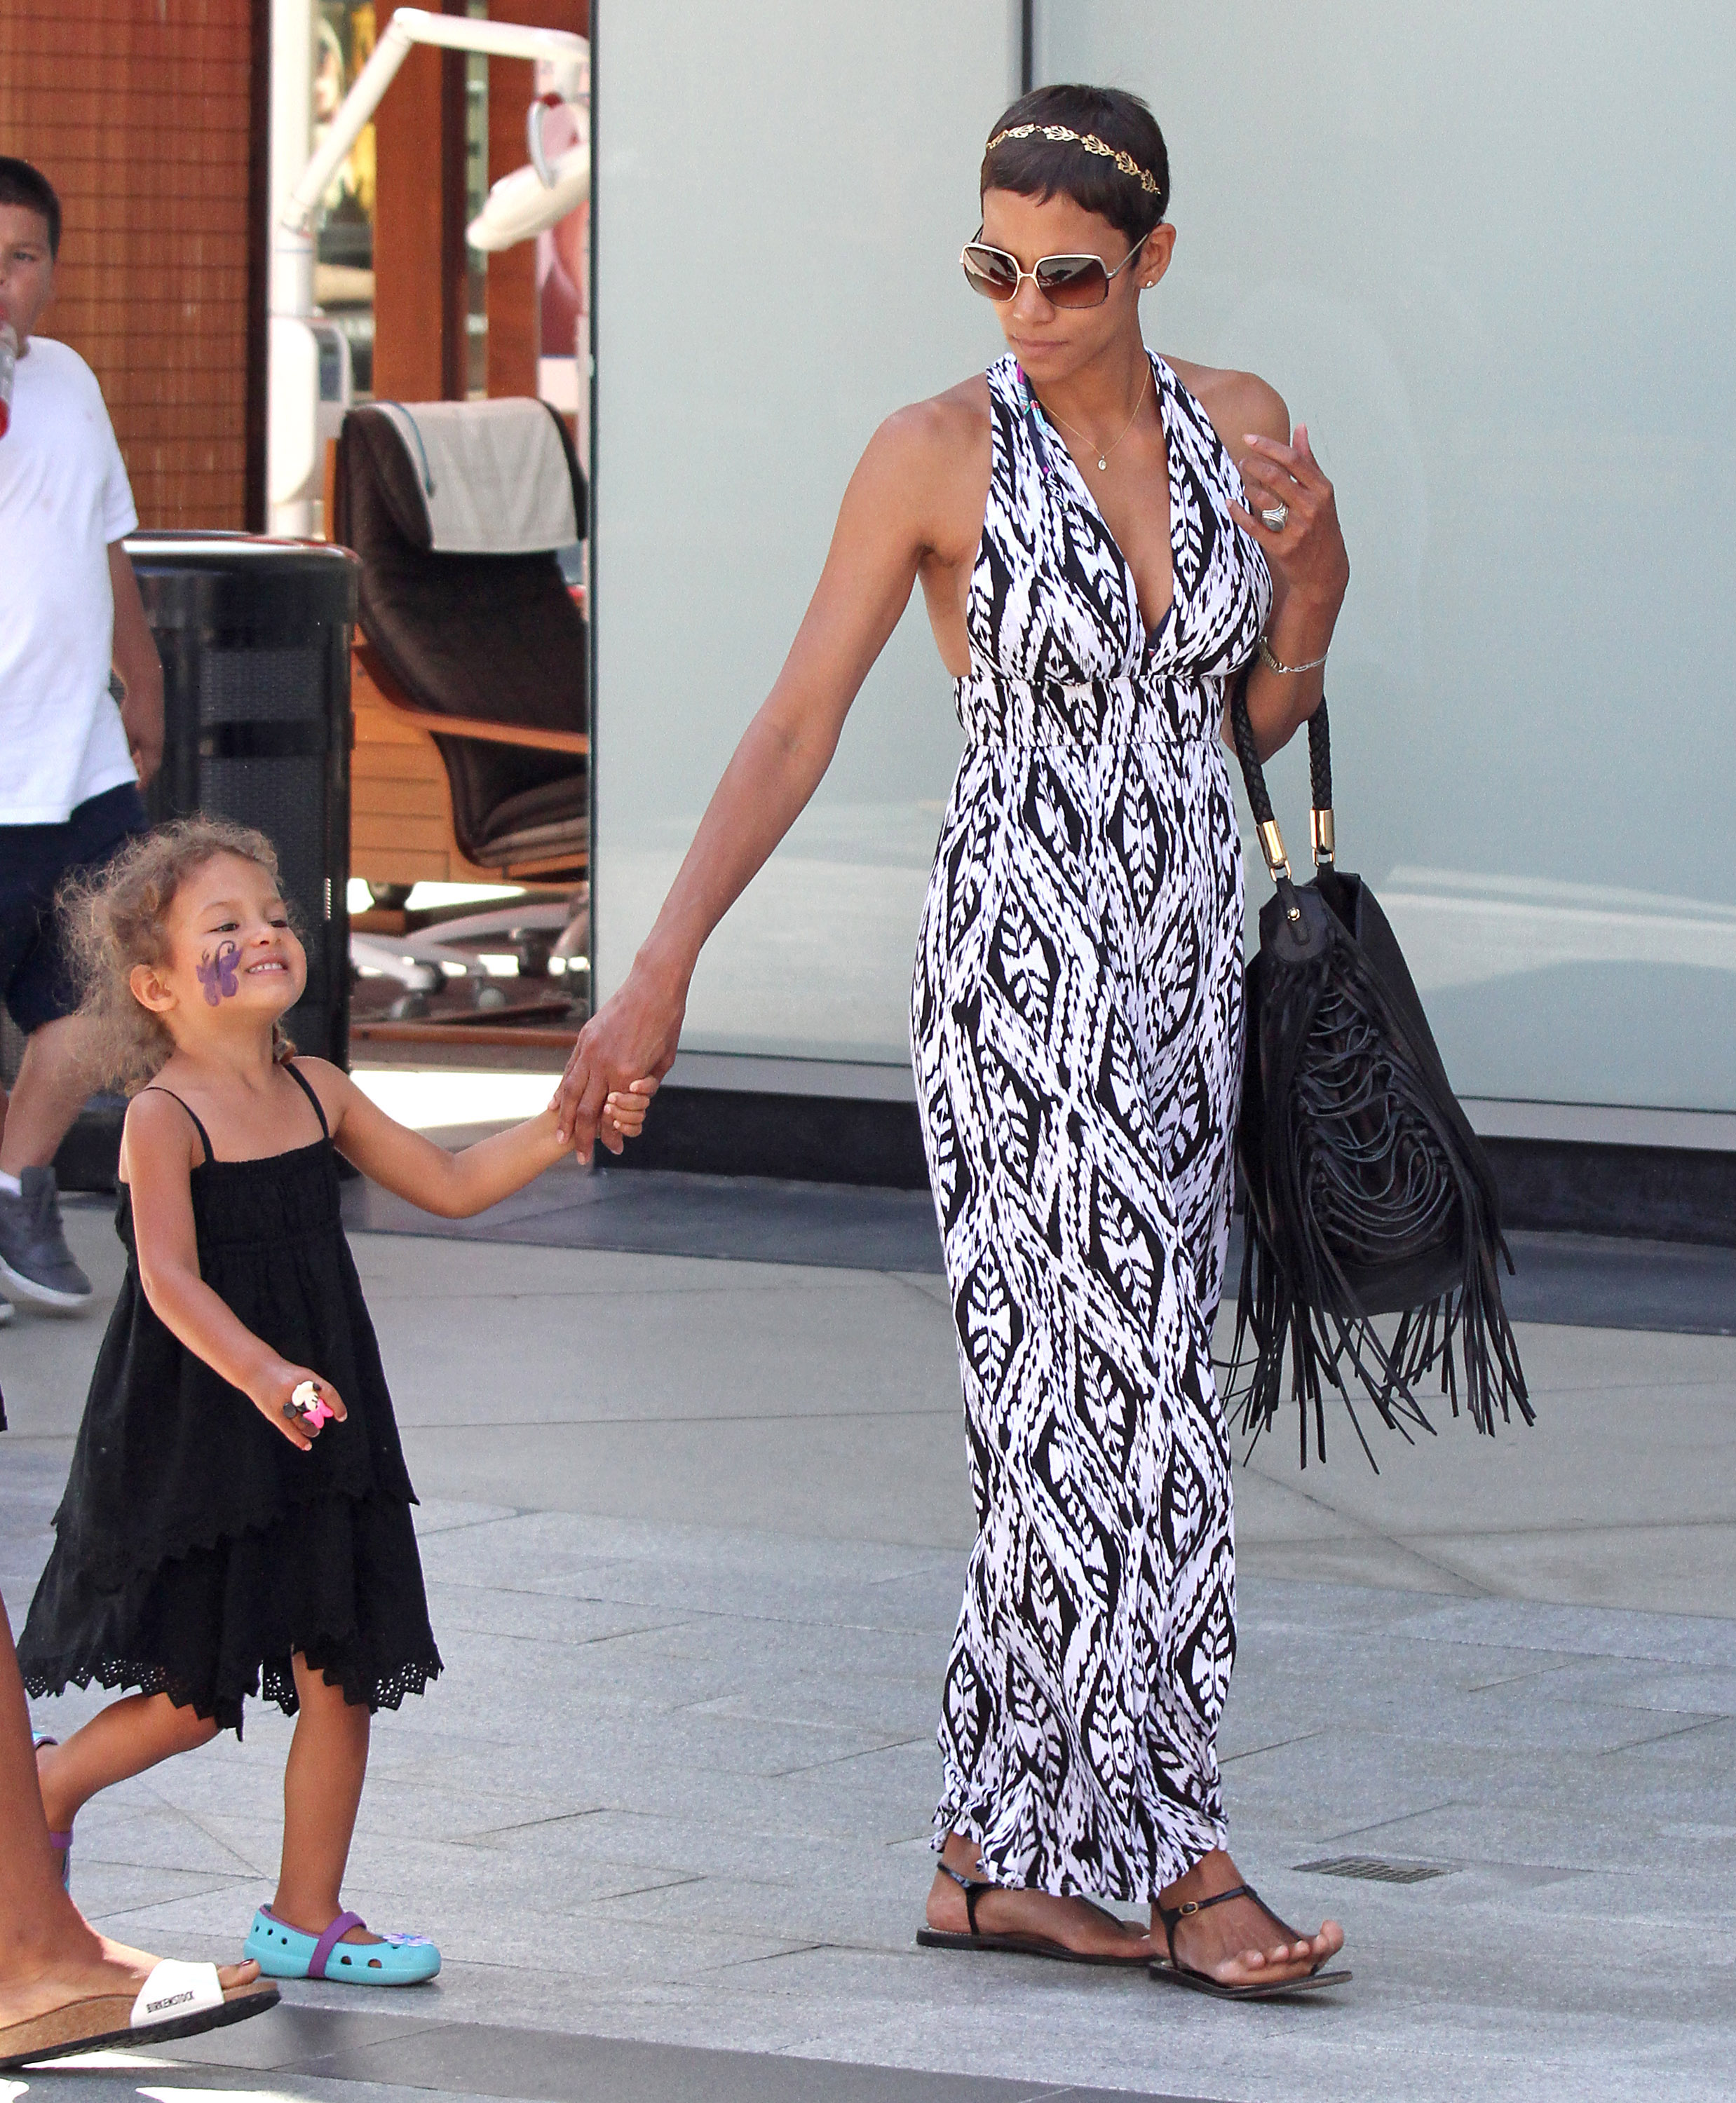 Halle Berry and Nahla Aubry in Century City on July 26, 2011 in Los Angeles, California | Source: Getty Images